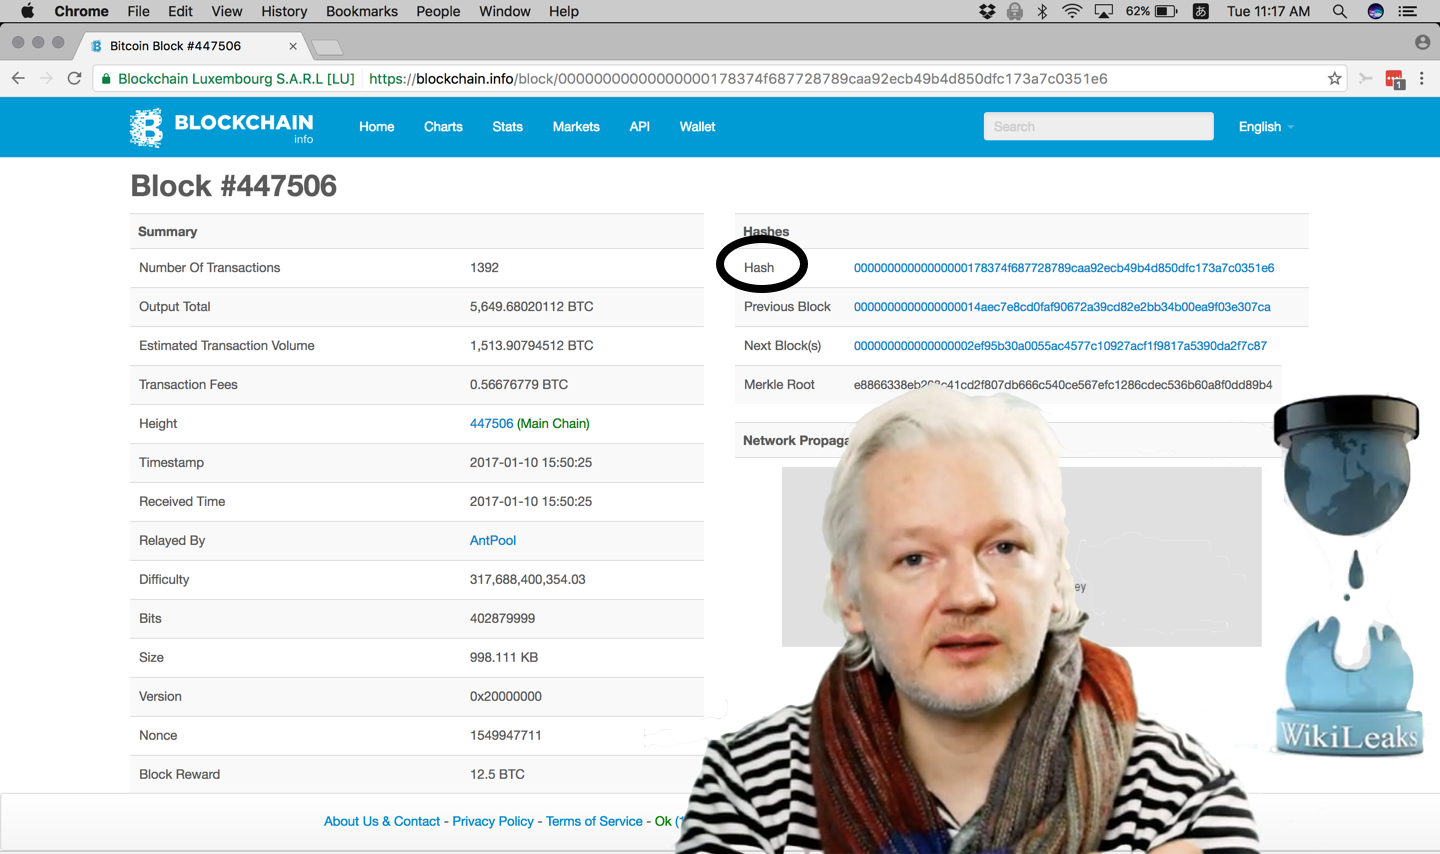 He’s Alive: Julian Assange Used the Bitcoin Blockchain for ...